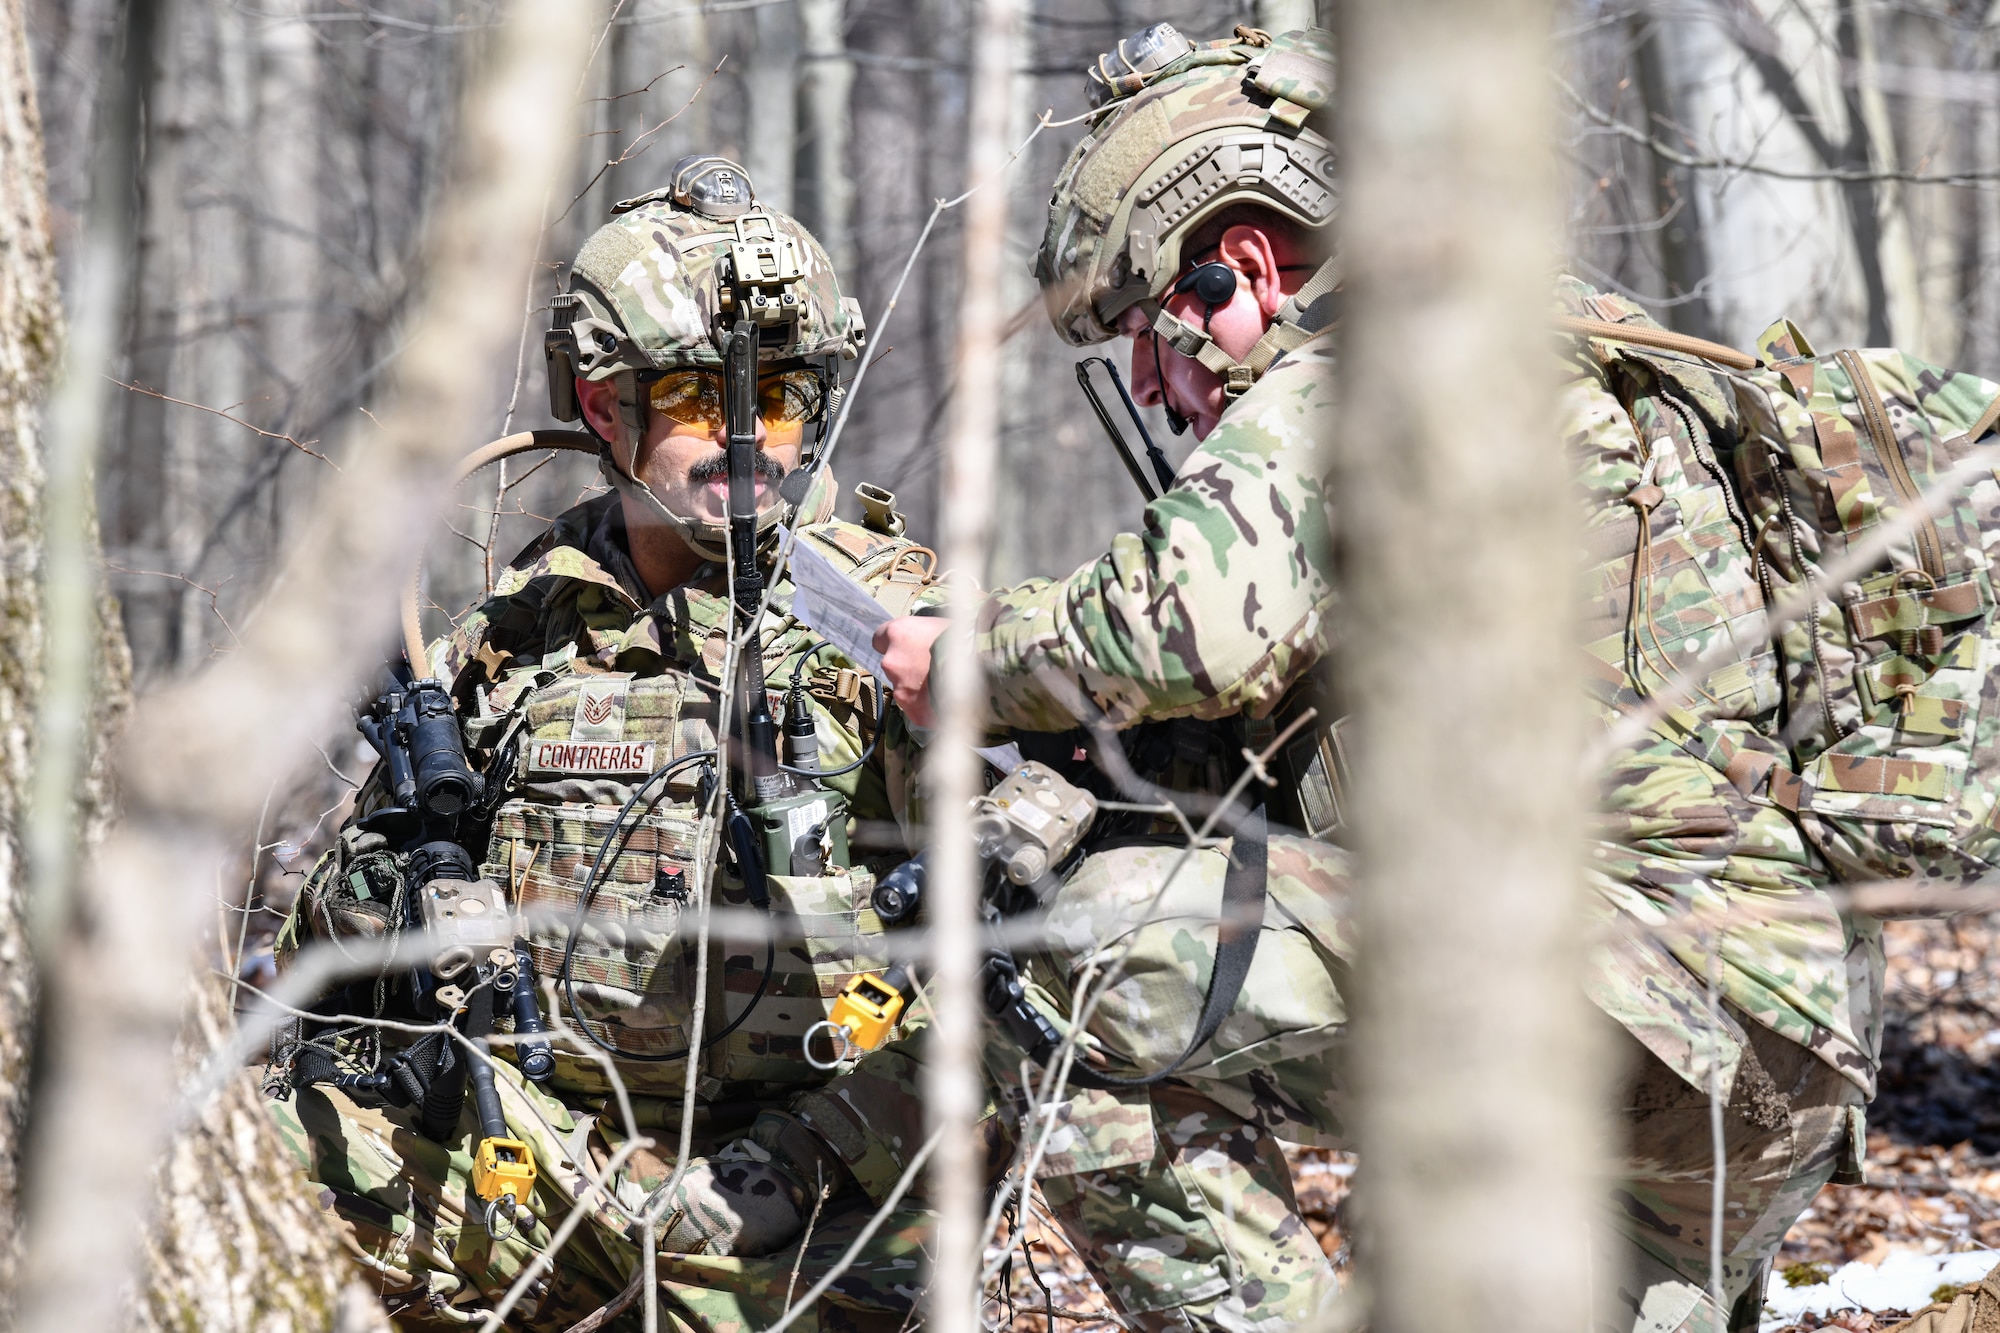 Tech. Sgts. Hanlet Contreras and Josue Cruz, fireteam members assigned to the 459th Security Forces Squadron, Joint Base Andrews, Maryland, use land navigation tools on March 15, 2023, at Camp James A. Garfield Joint Military Training Center, Ohio.